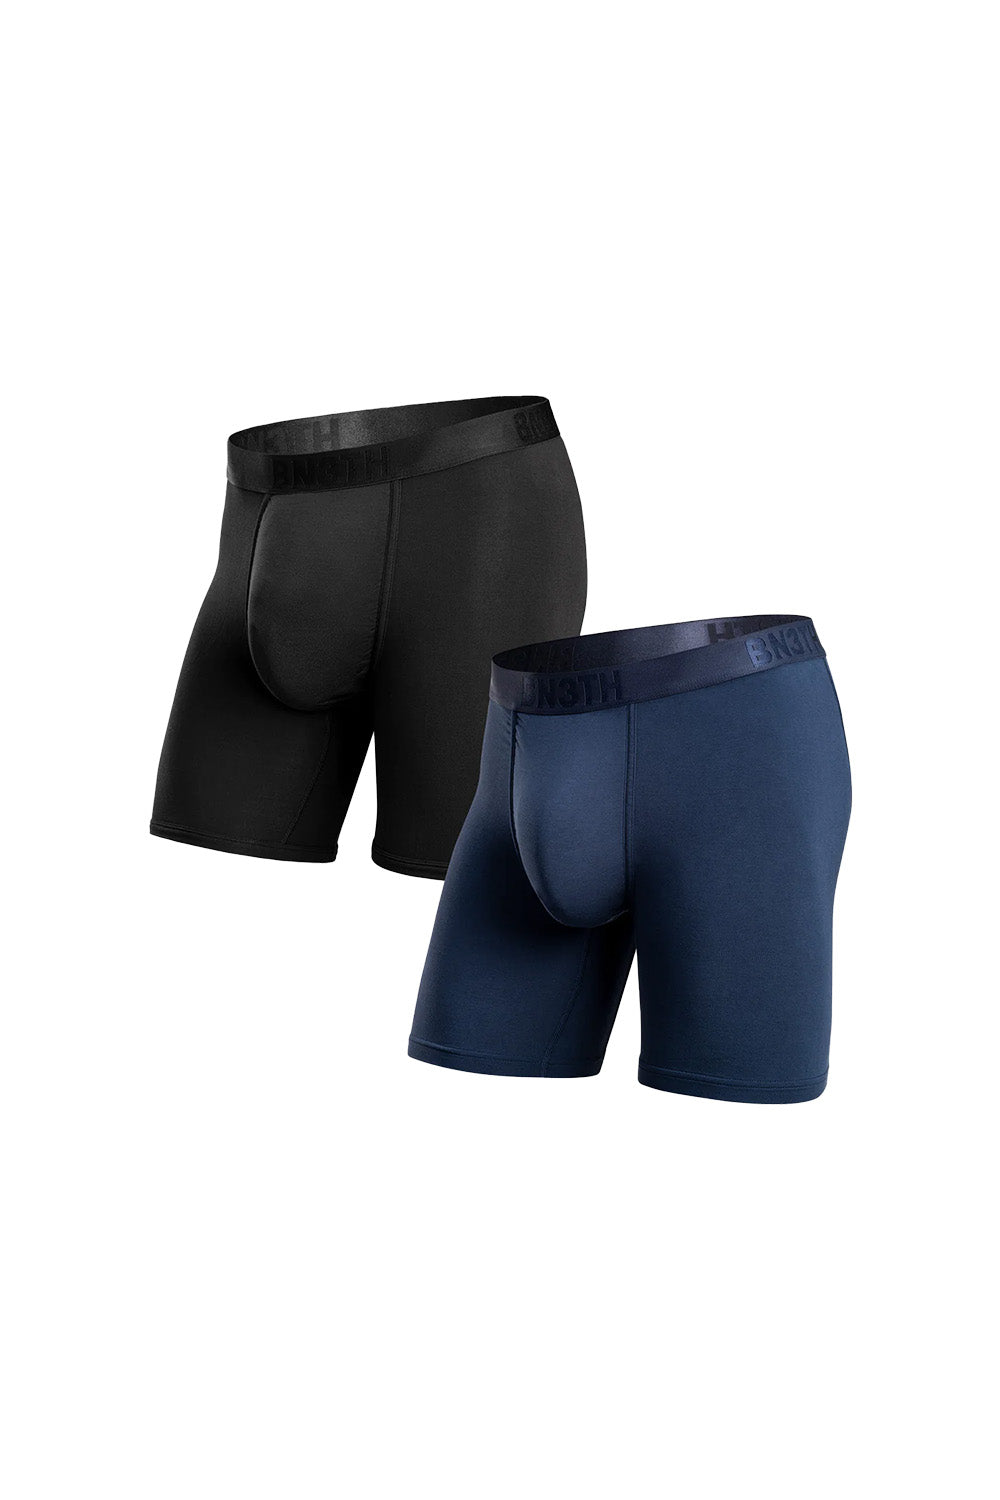 BN3TH - Classics Boxer Brief 2 Pack - Black/Navy - Front